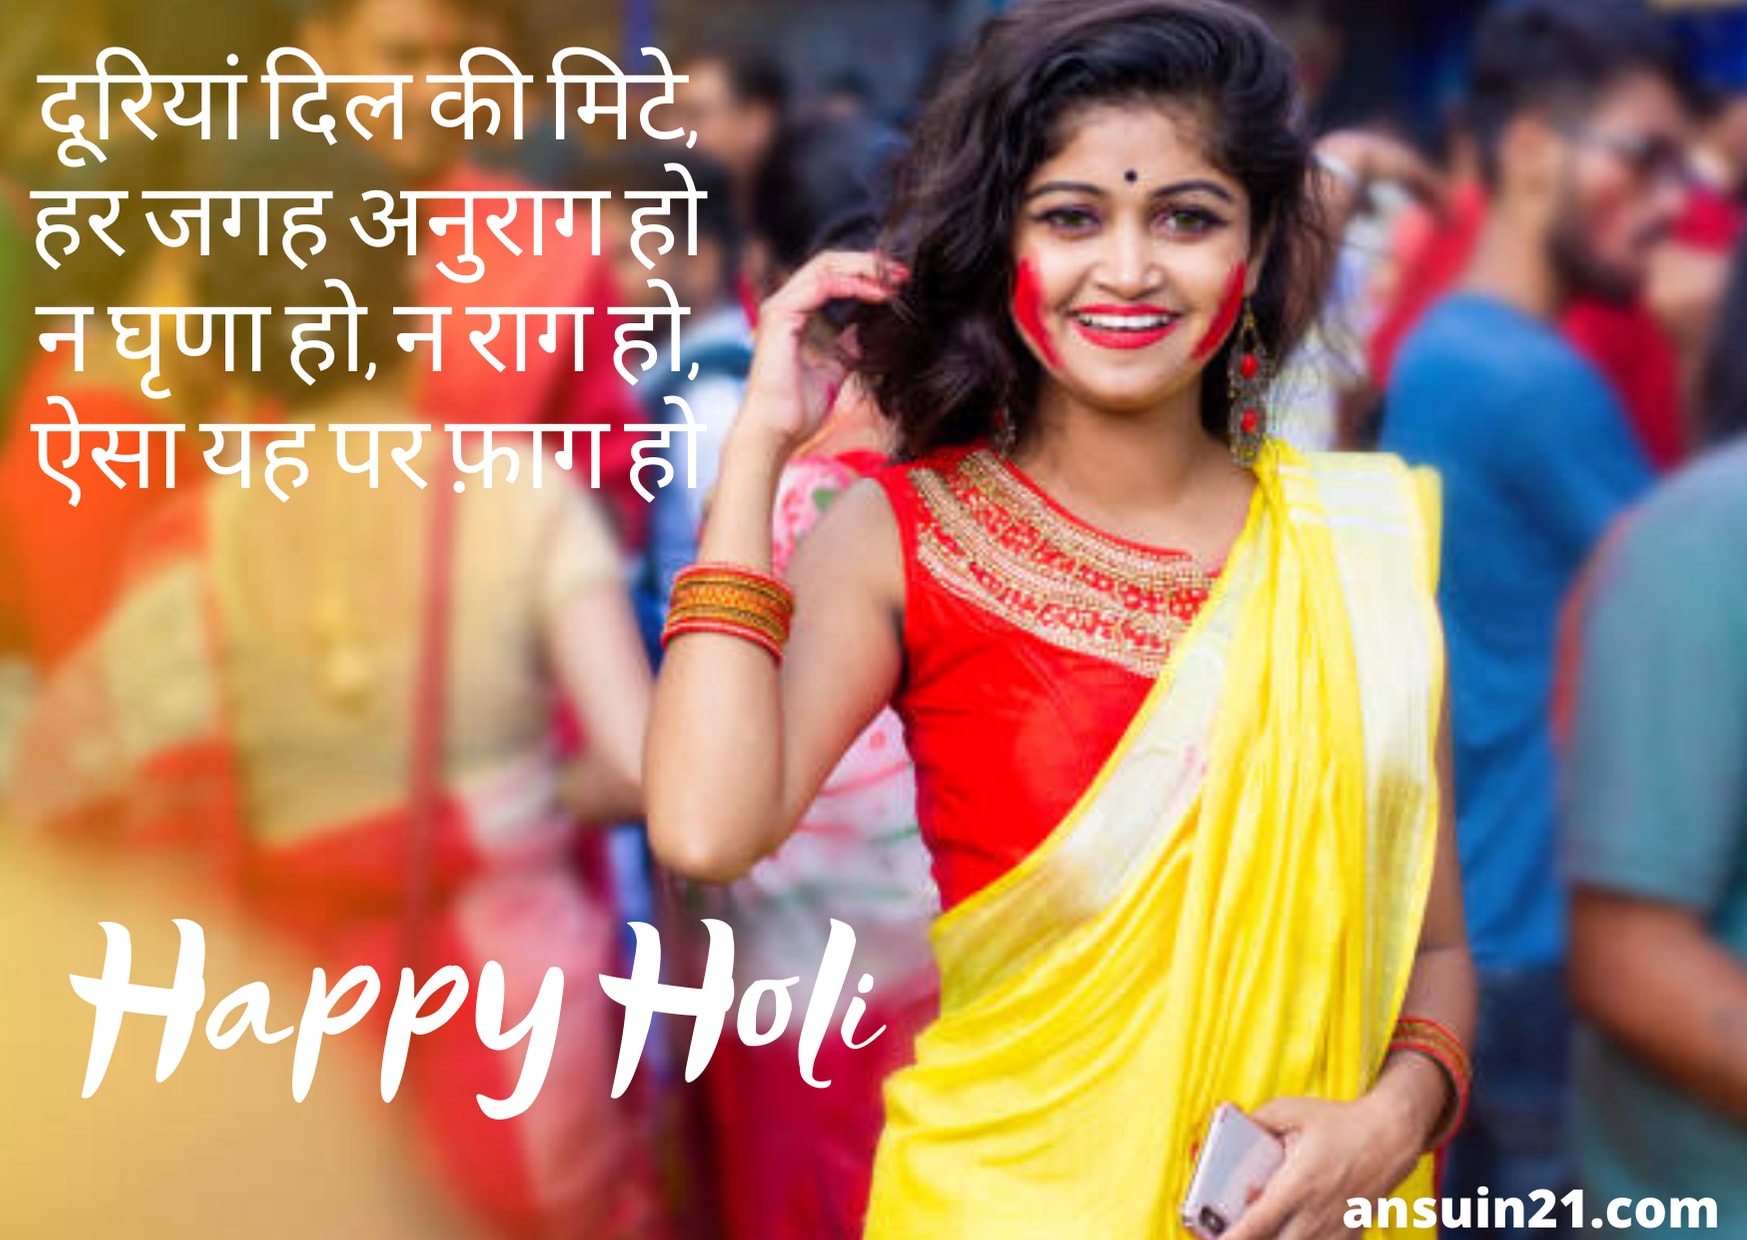 Happy Holi Wishes Images, Quotes SMS In Hindi and English,